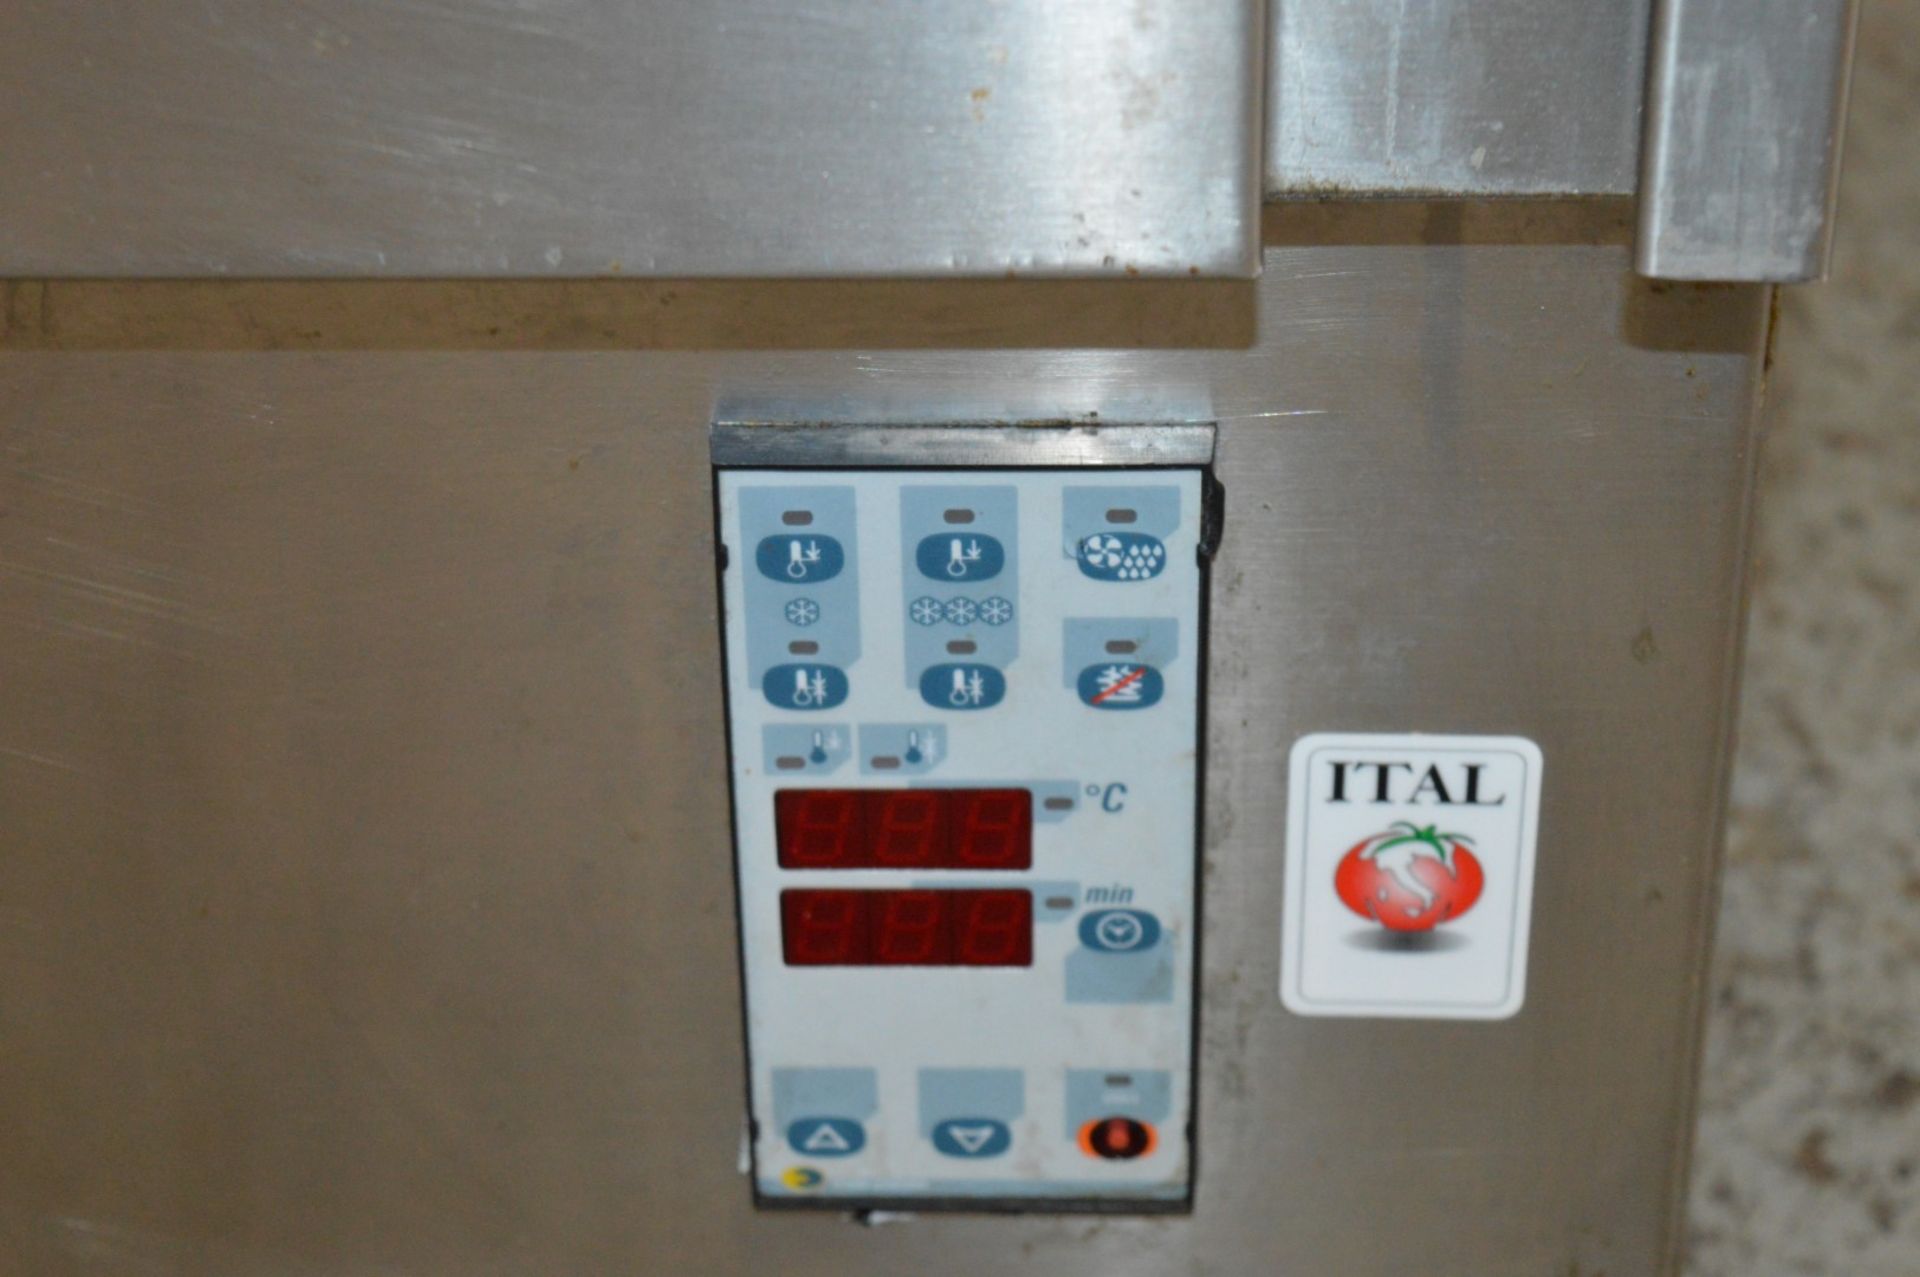 1 x Ital Compact Undercounter Blast Chiller - Stainless Steel - H82 x W75.5 x D74 cms - CL232 - - Image 4 of 7